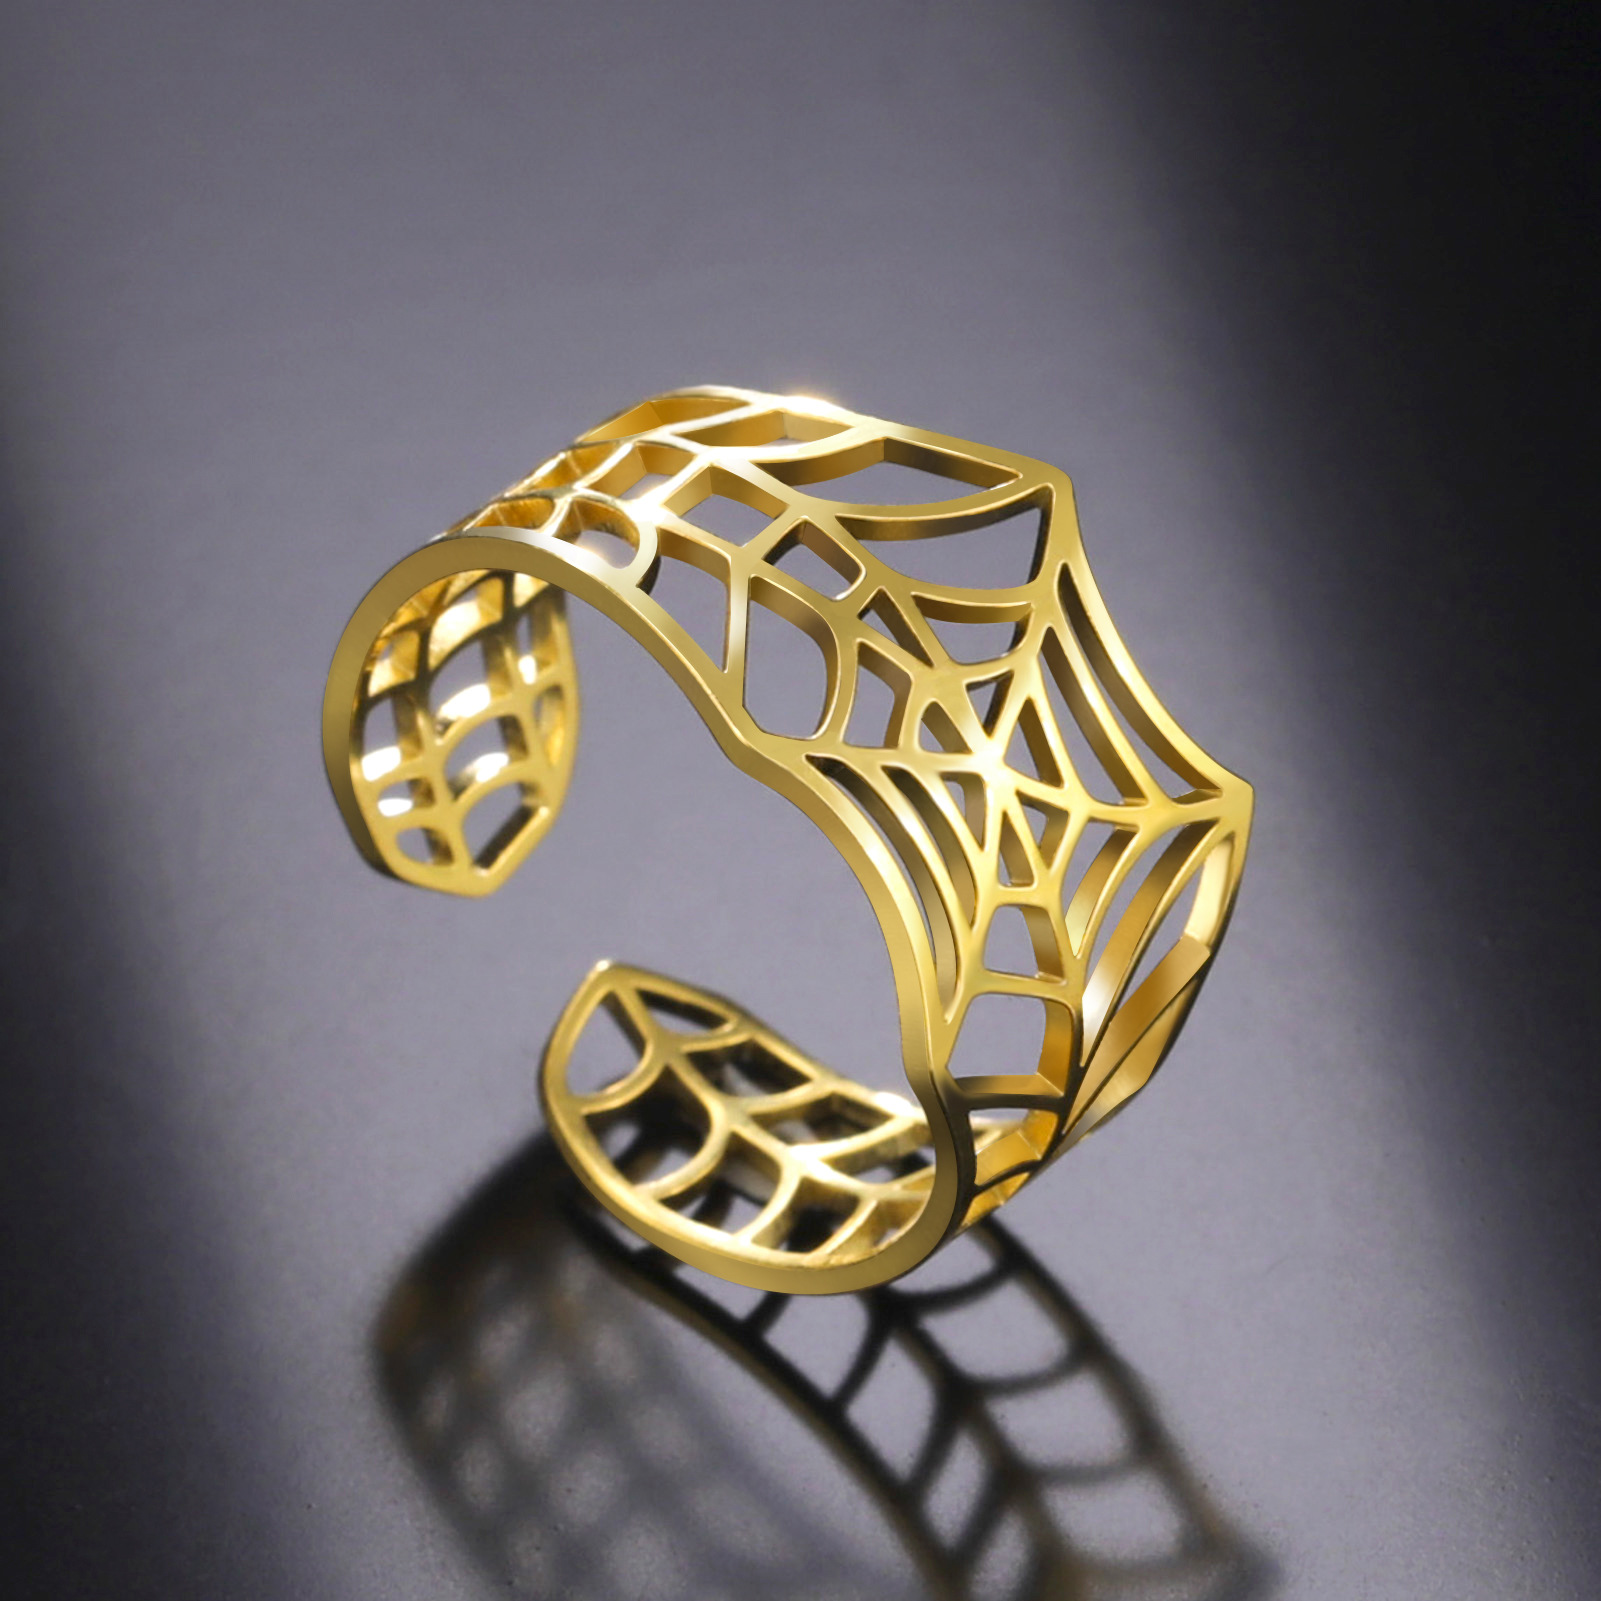 SpiderMan Ring Adjustable Opening Stainless Steel Spider Web Ring Gold Plated Silver Color Stylish Jewelry Gift with box Wholesale and Dropshipping Supported